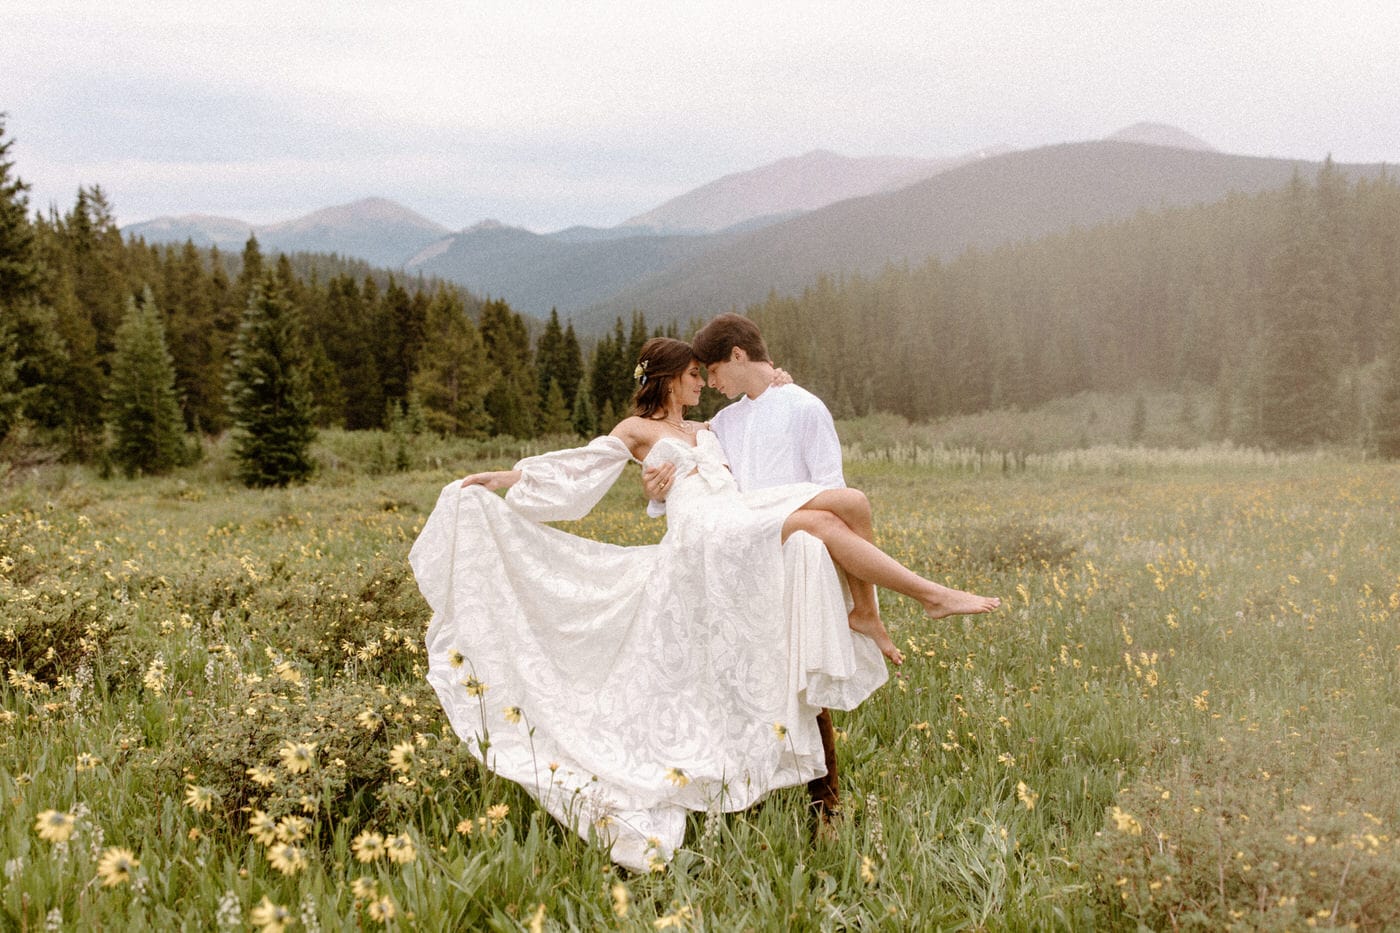 A bride and groom in a whimsical pose on their elopement day in Breckenridge, Colorado.